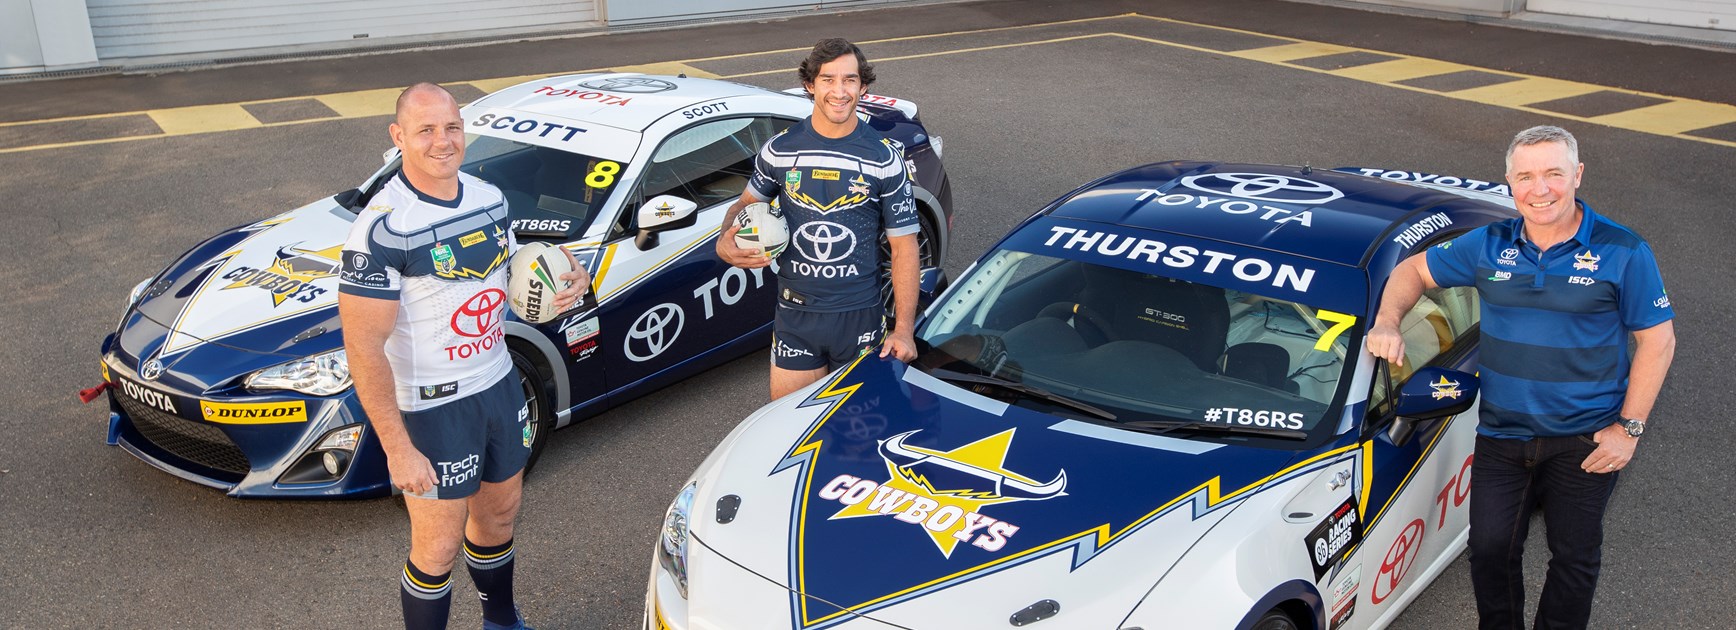 Cowboys revving up for Toyota 86 Racing Series